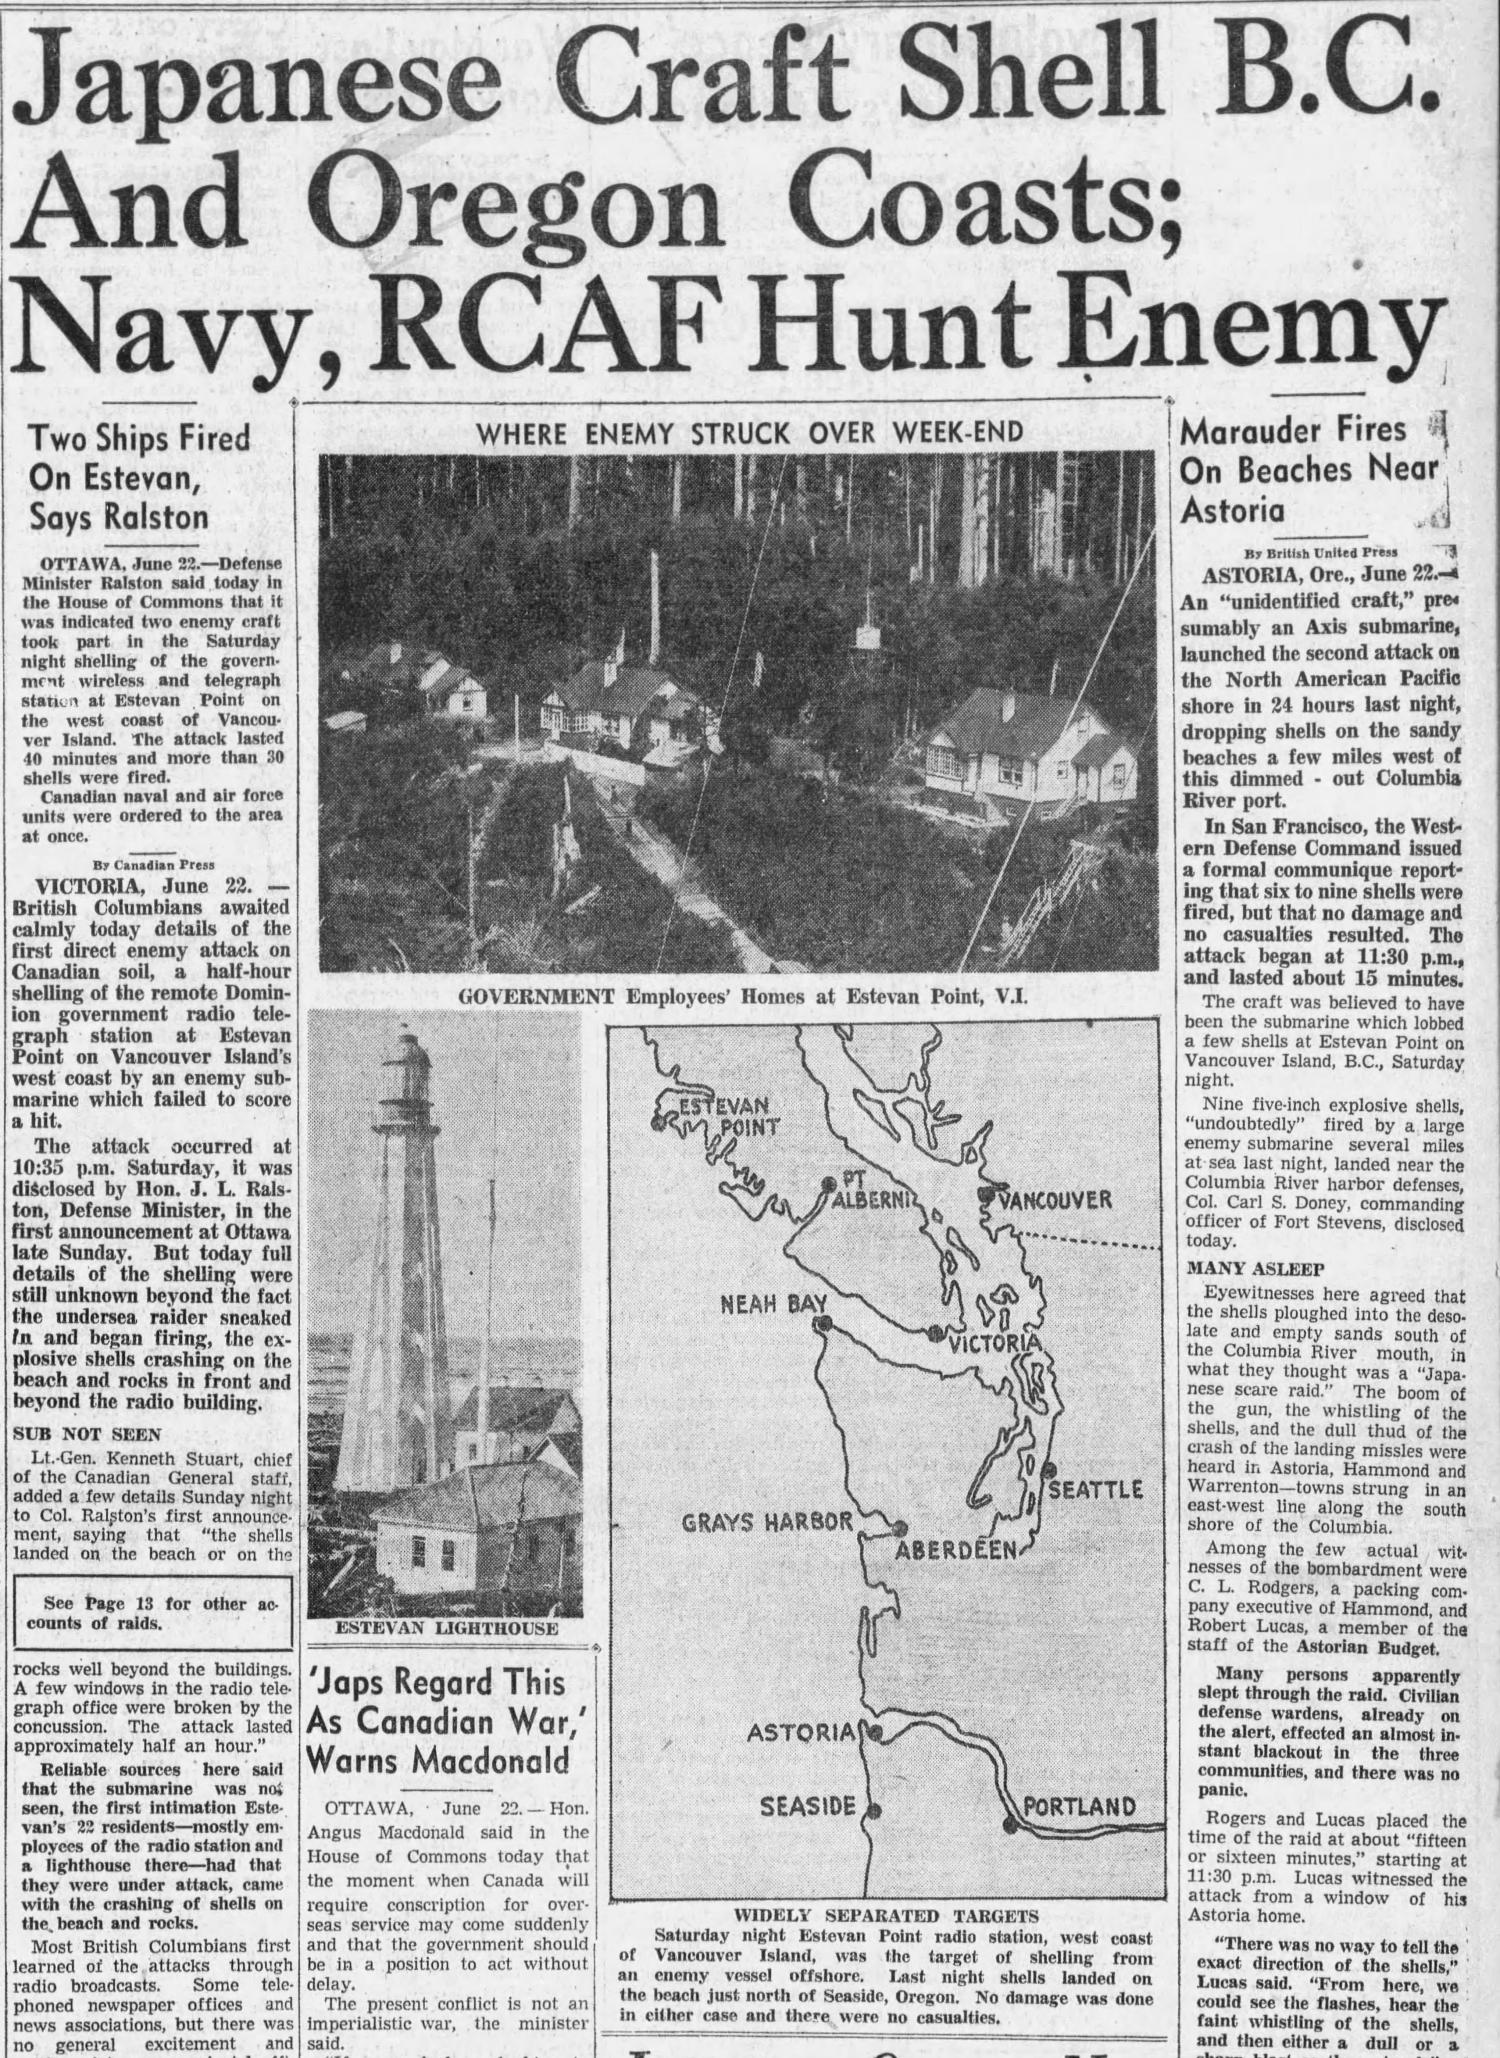 Article about the shelling of Estevan Point